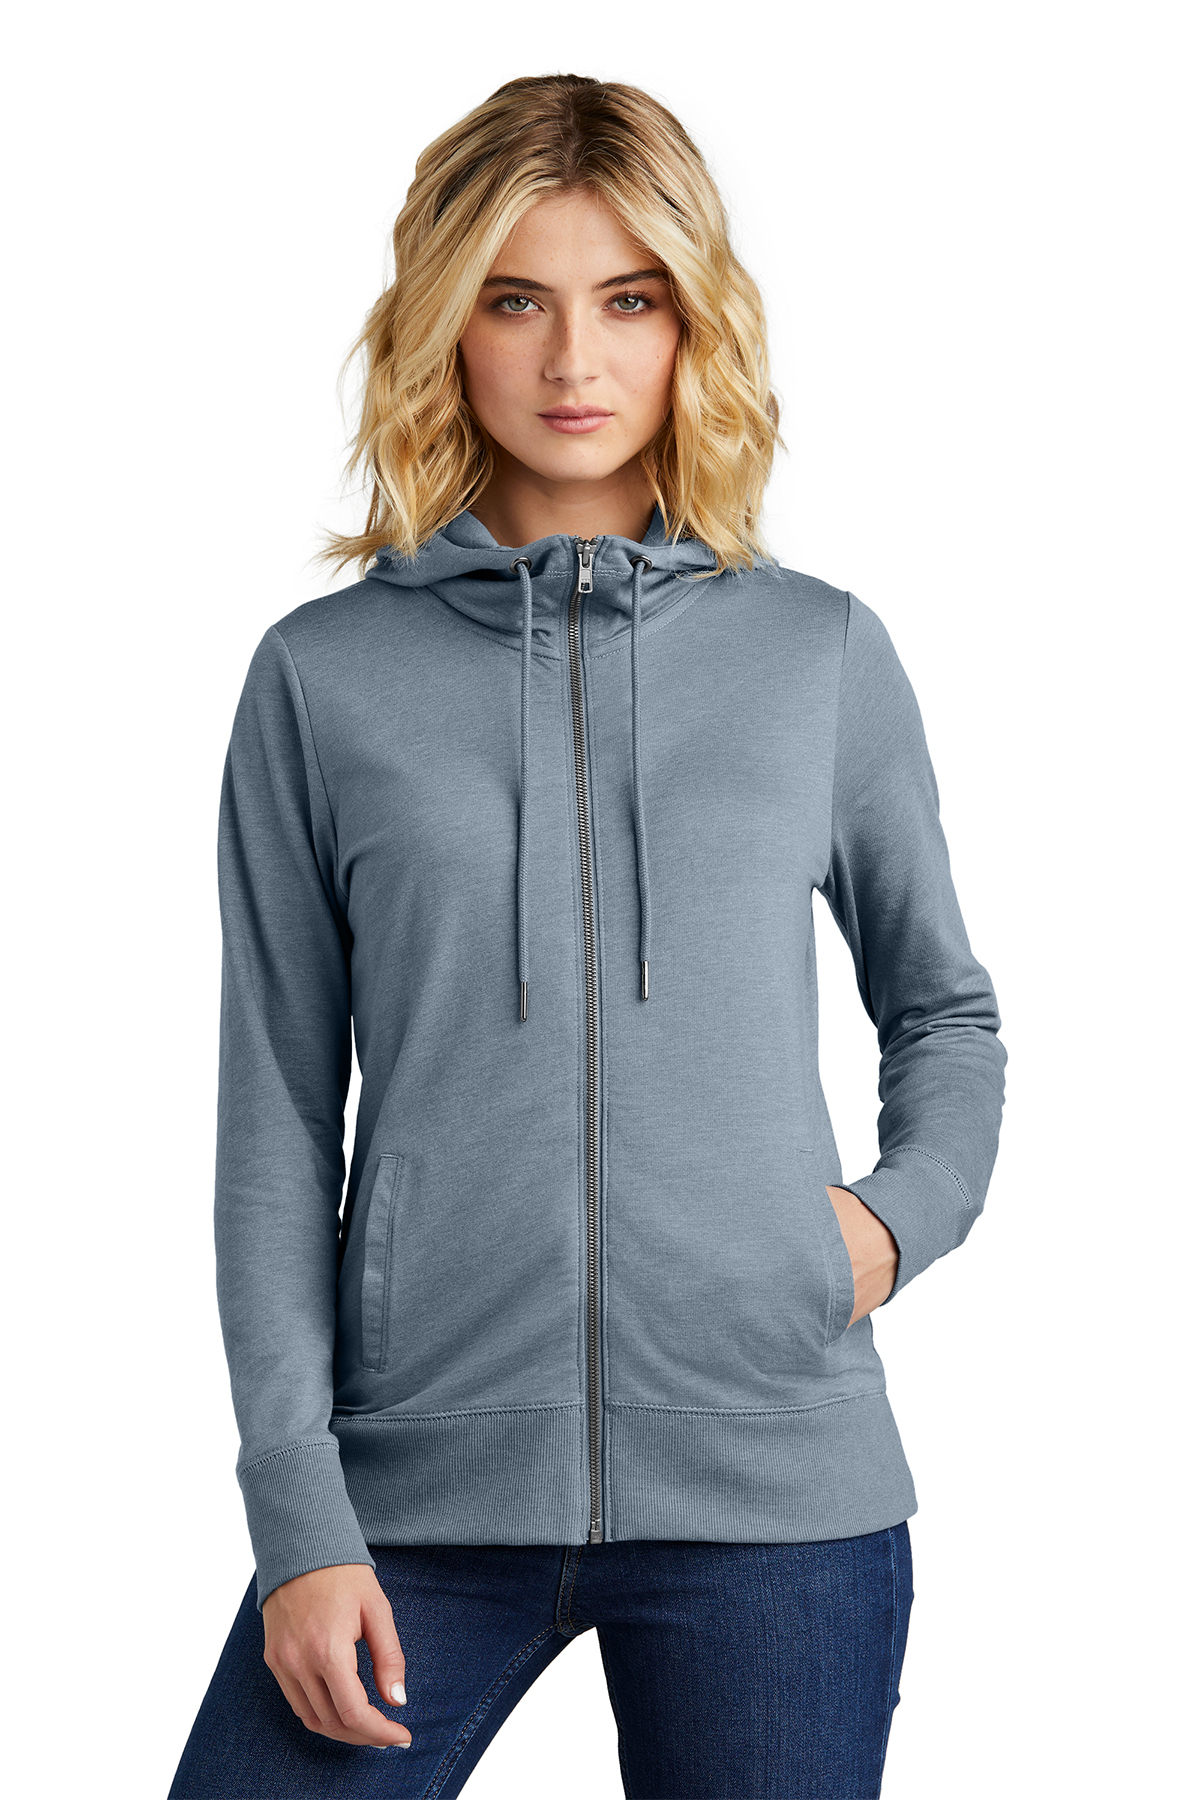 District DT673 - Women's Featherweight French Terry™ Full-Zip Hoodie